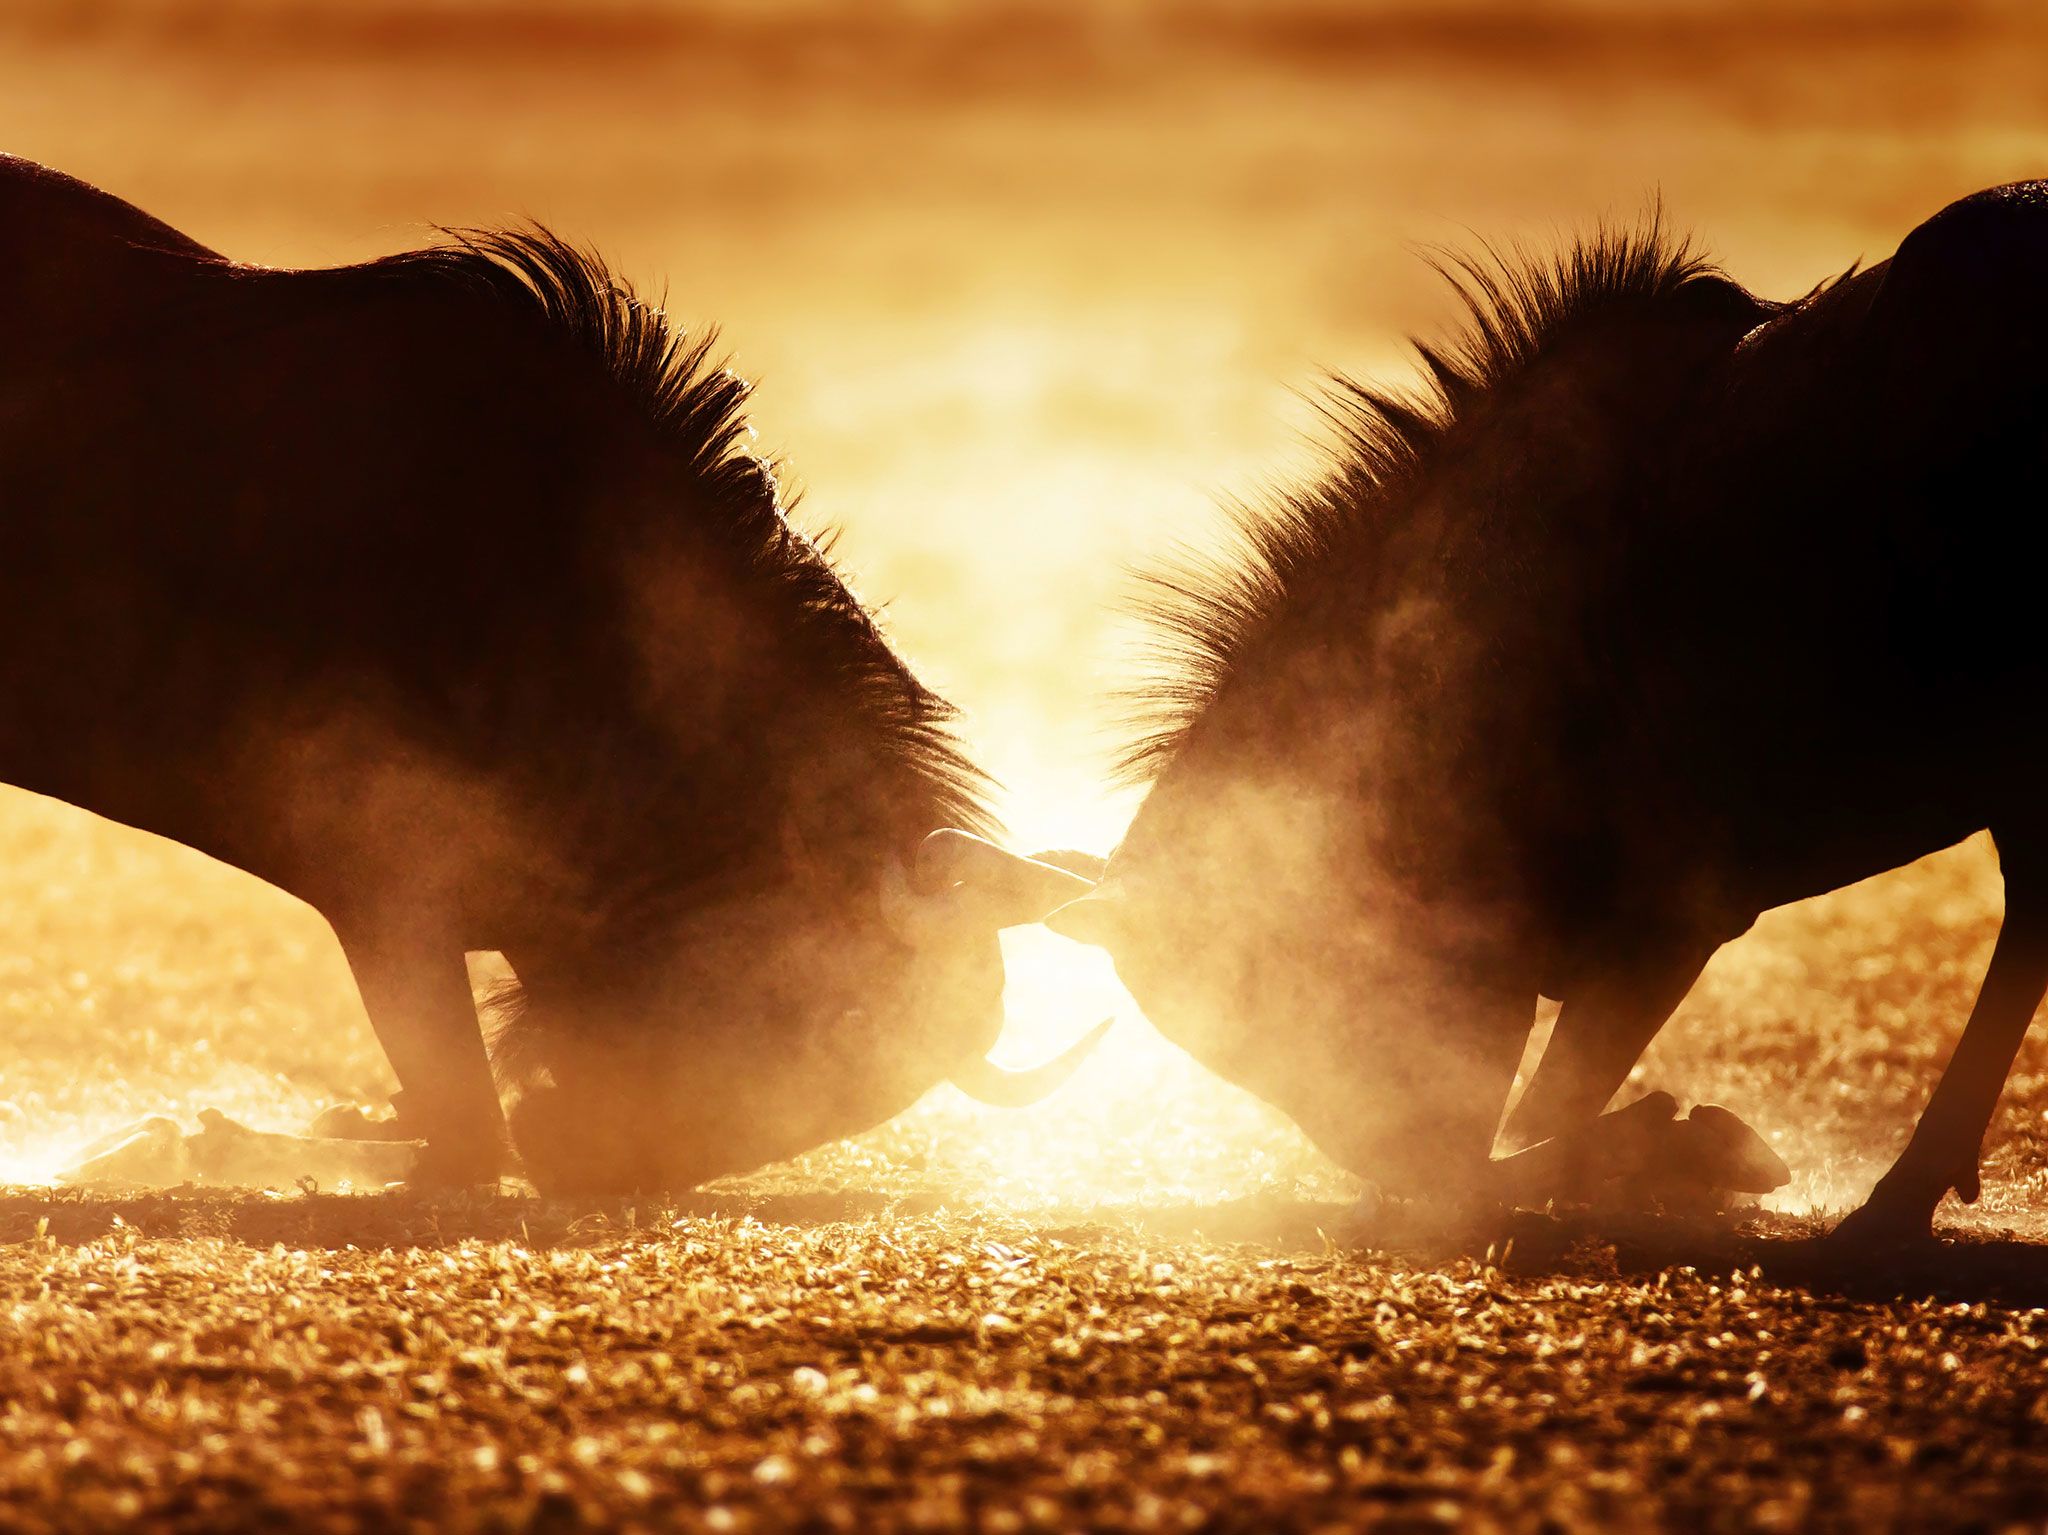 Blue wildebeest dual in dust. This image is from Animal Fight Club. [Photo of the day - May 2017]